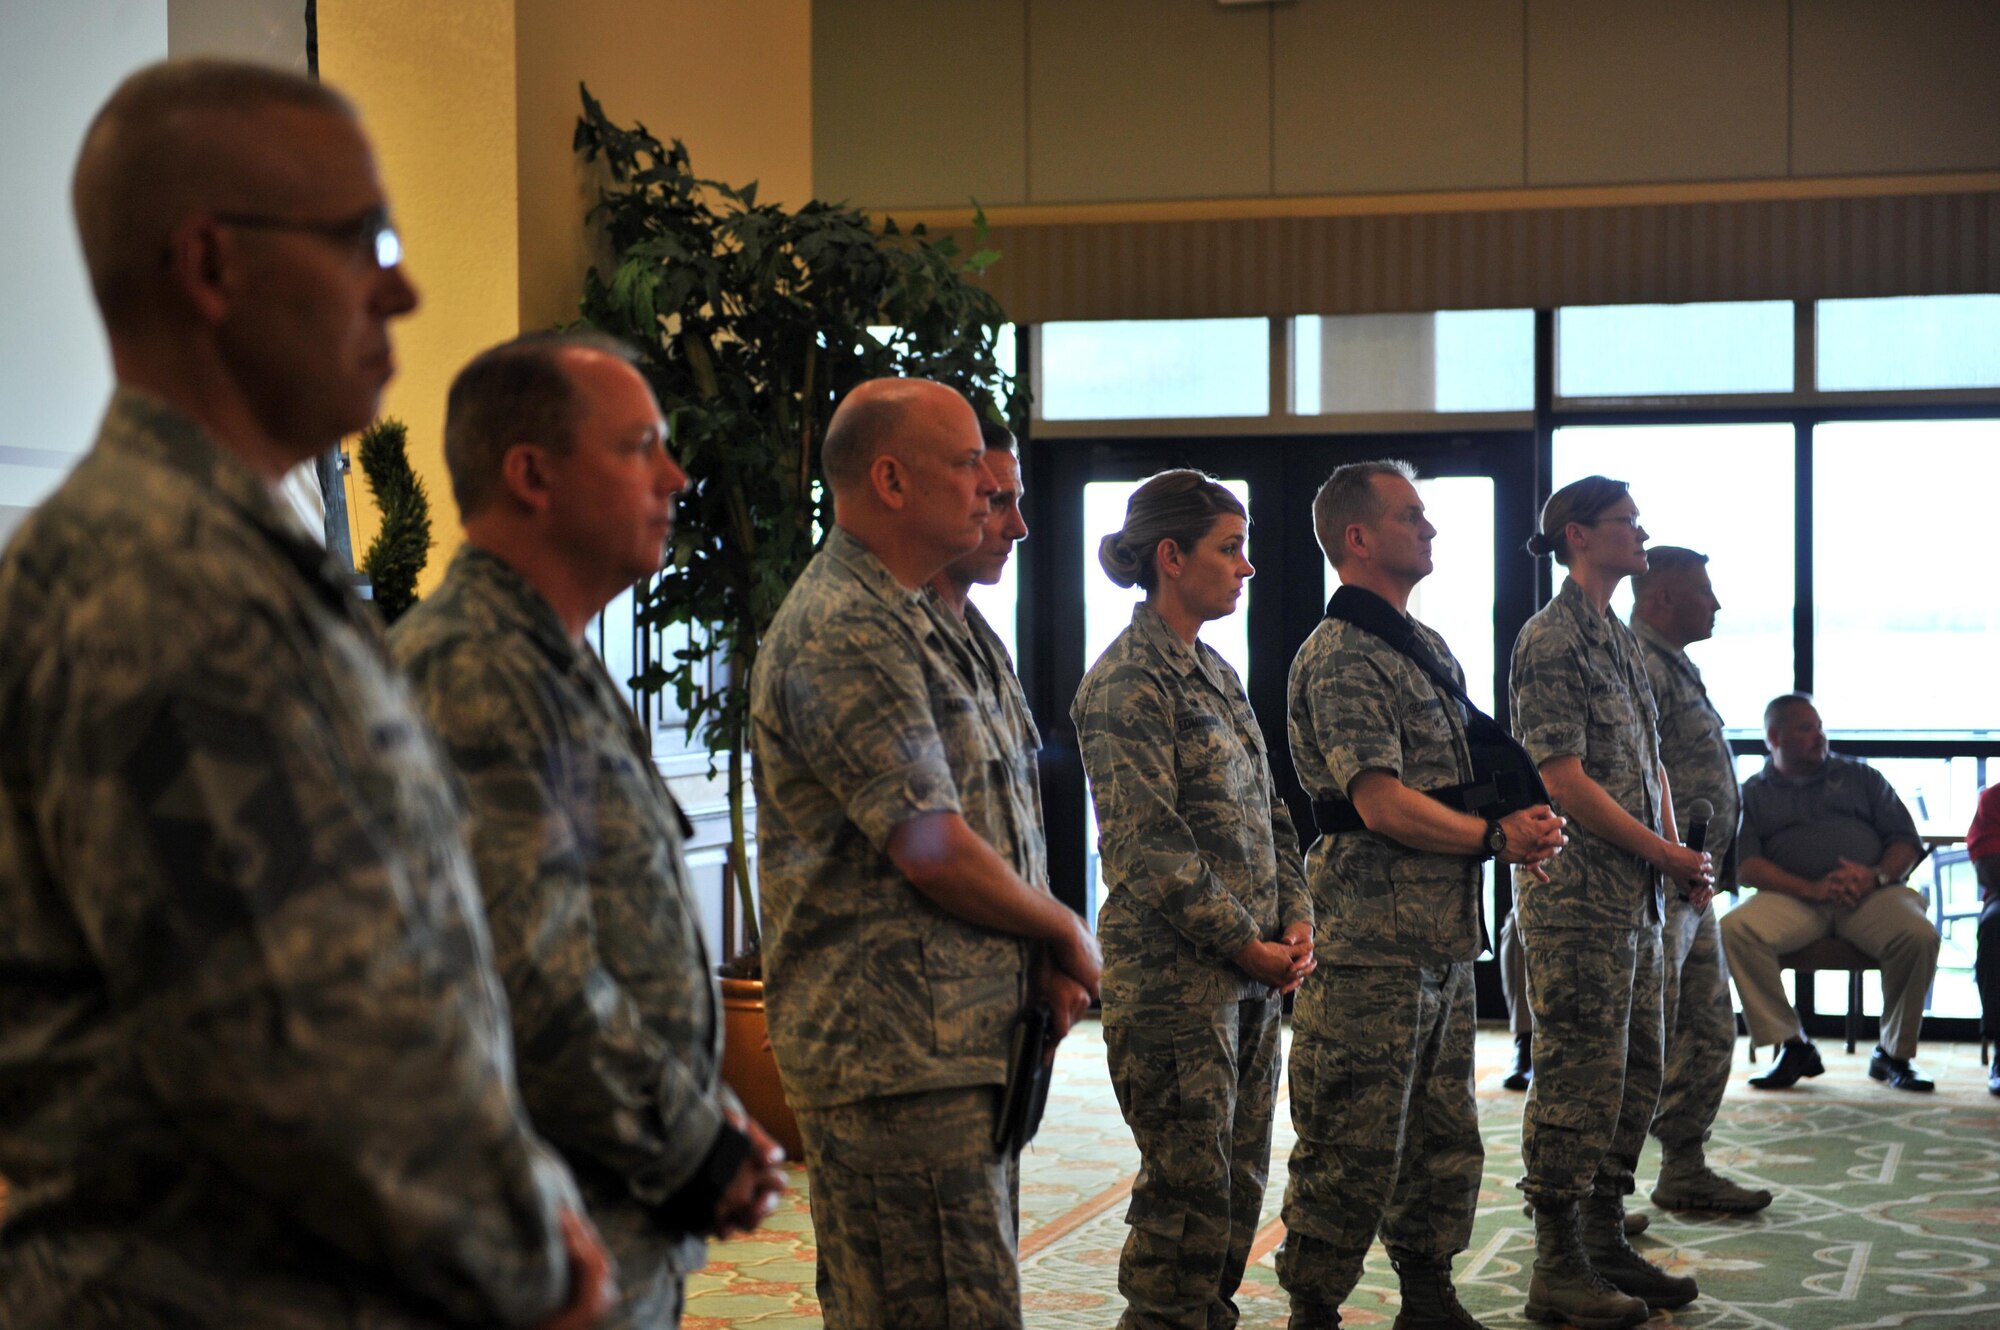 Keesler leadership listen to questions during a Q-and-A session of a town hall forum in the Bay Breeze Event Center ballroom, May 3, 2016, Keesler Air Force Base, Miss. Hosted by Col. Michele Edmondson, 81st Training Wing commander, the forum was used to discuss current base events, Keesler’s dozens of recent command-level awards, emergency management, hospital and housing issues and the upcoming hurricane season. (U.S. Air Force photo by Senior Airman Duncan McElroy)